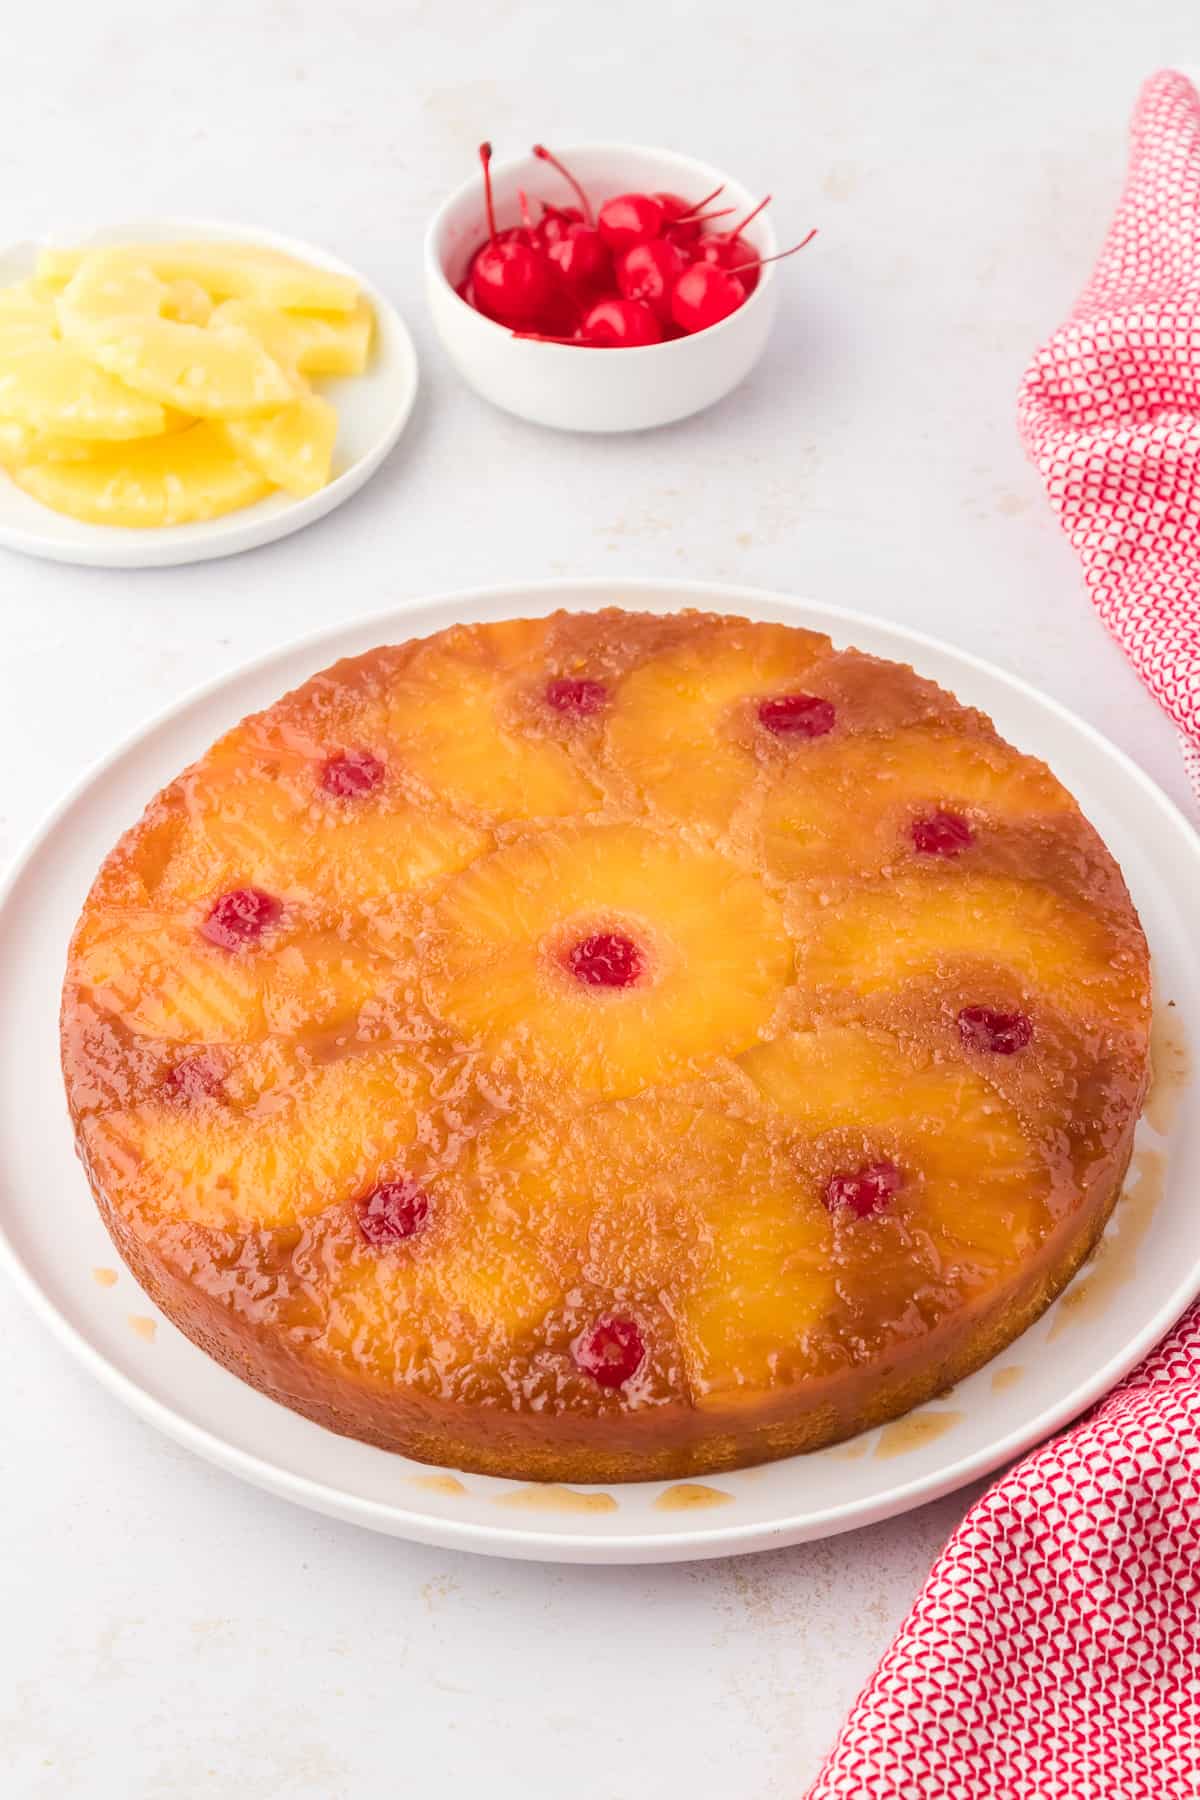 pineapple upside down cake on a white plate surrounded by pineapple slices, maraschino cherries and a red and white towel